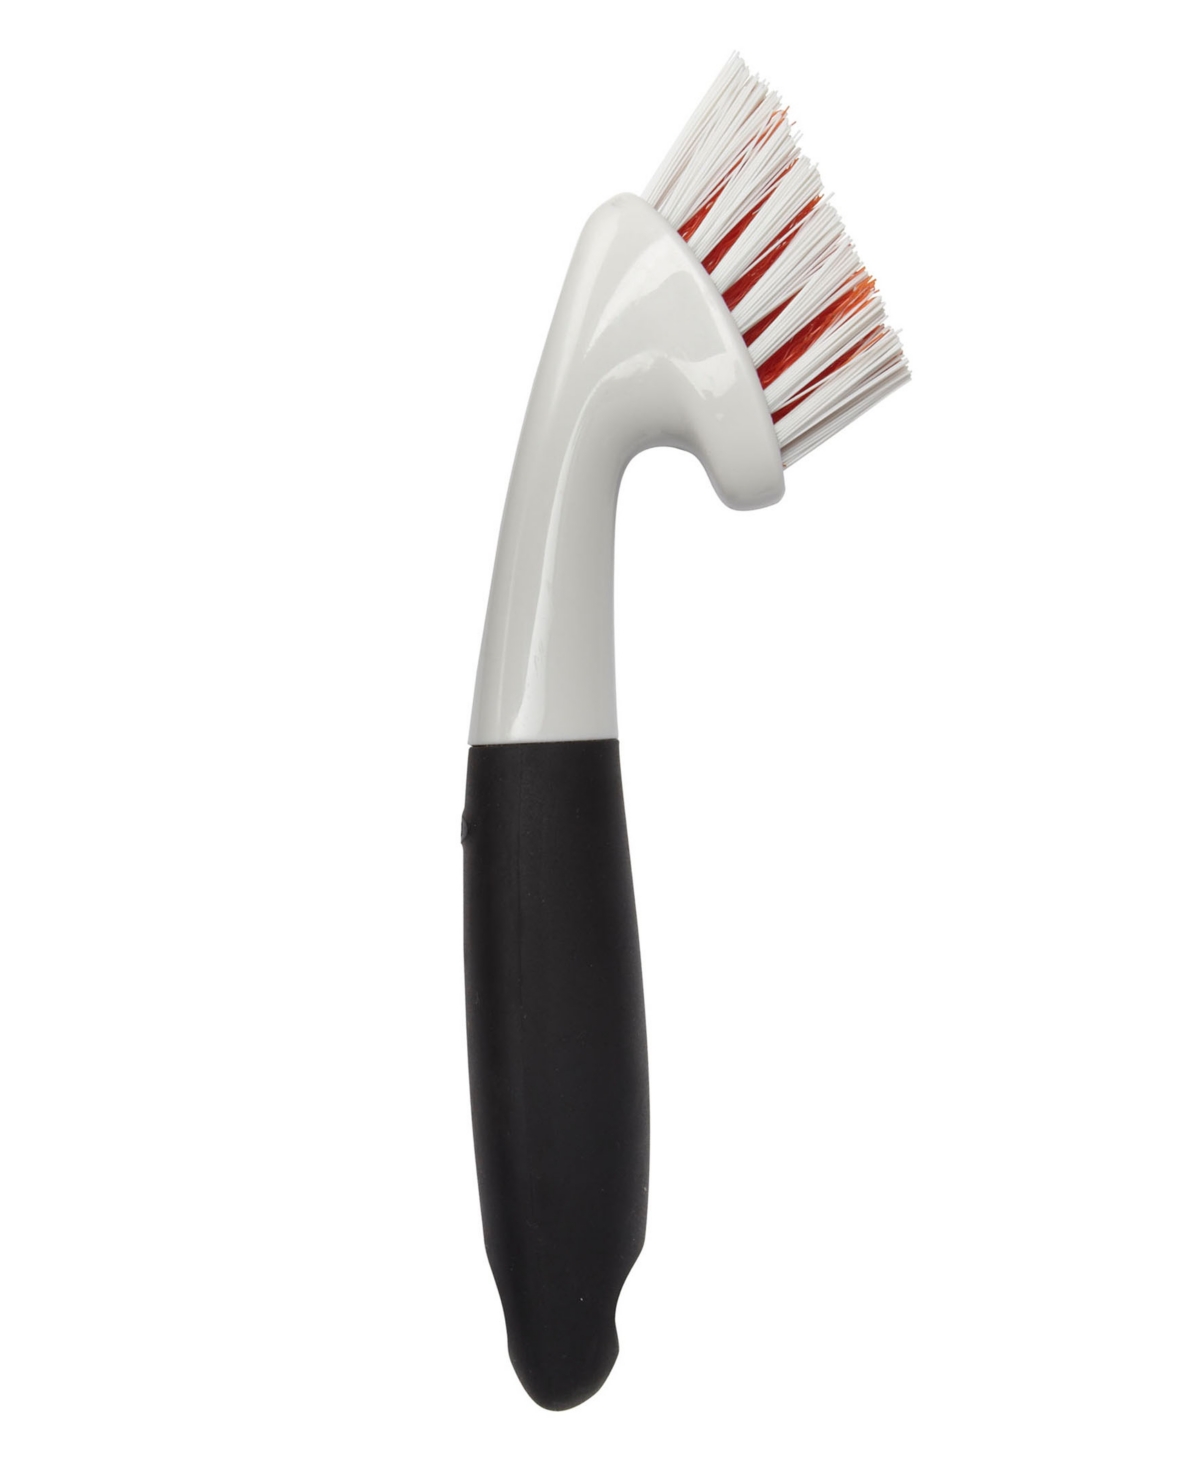 Gg Grout Brush